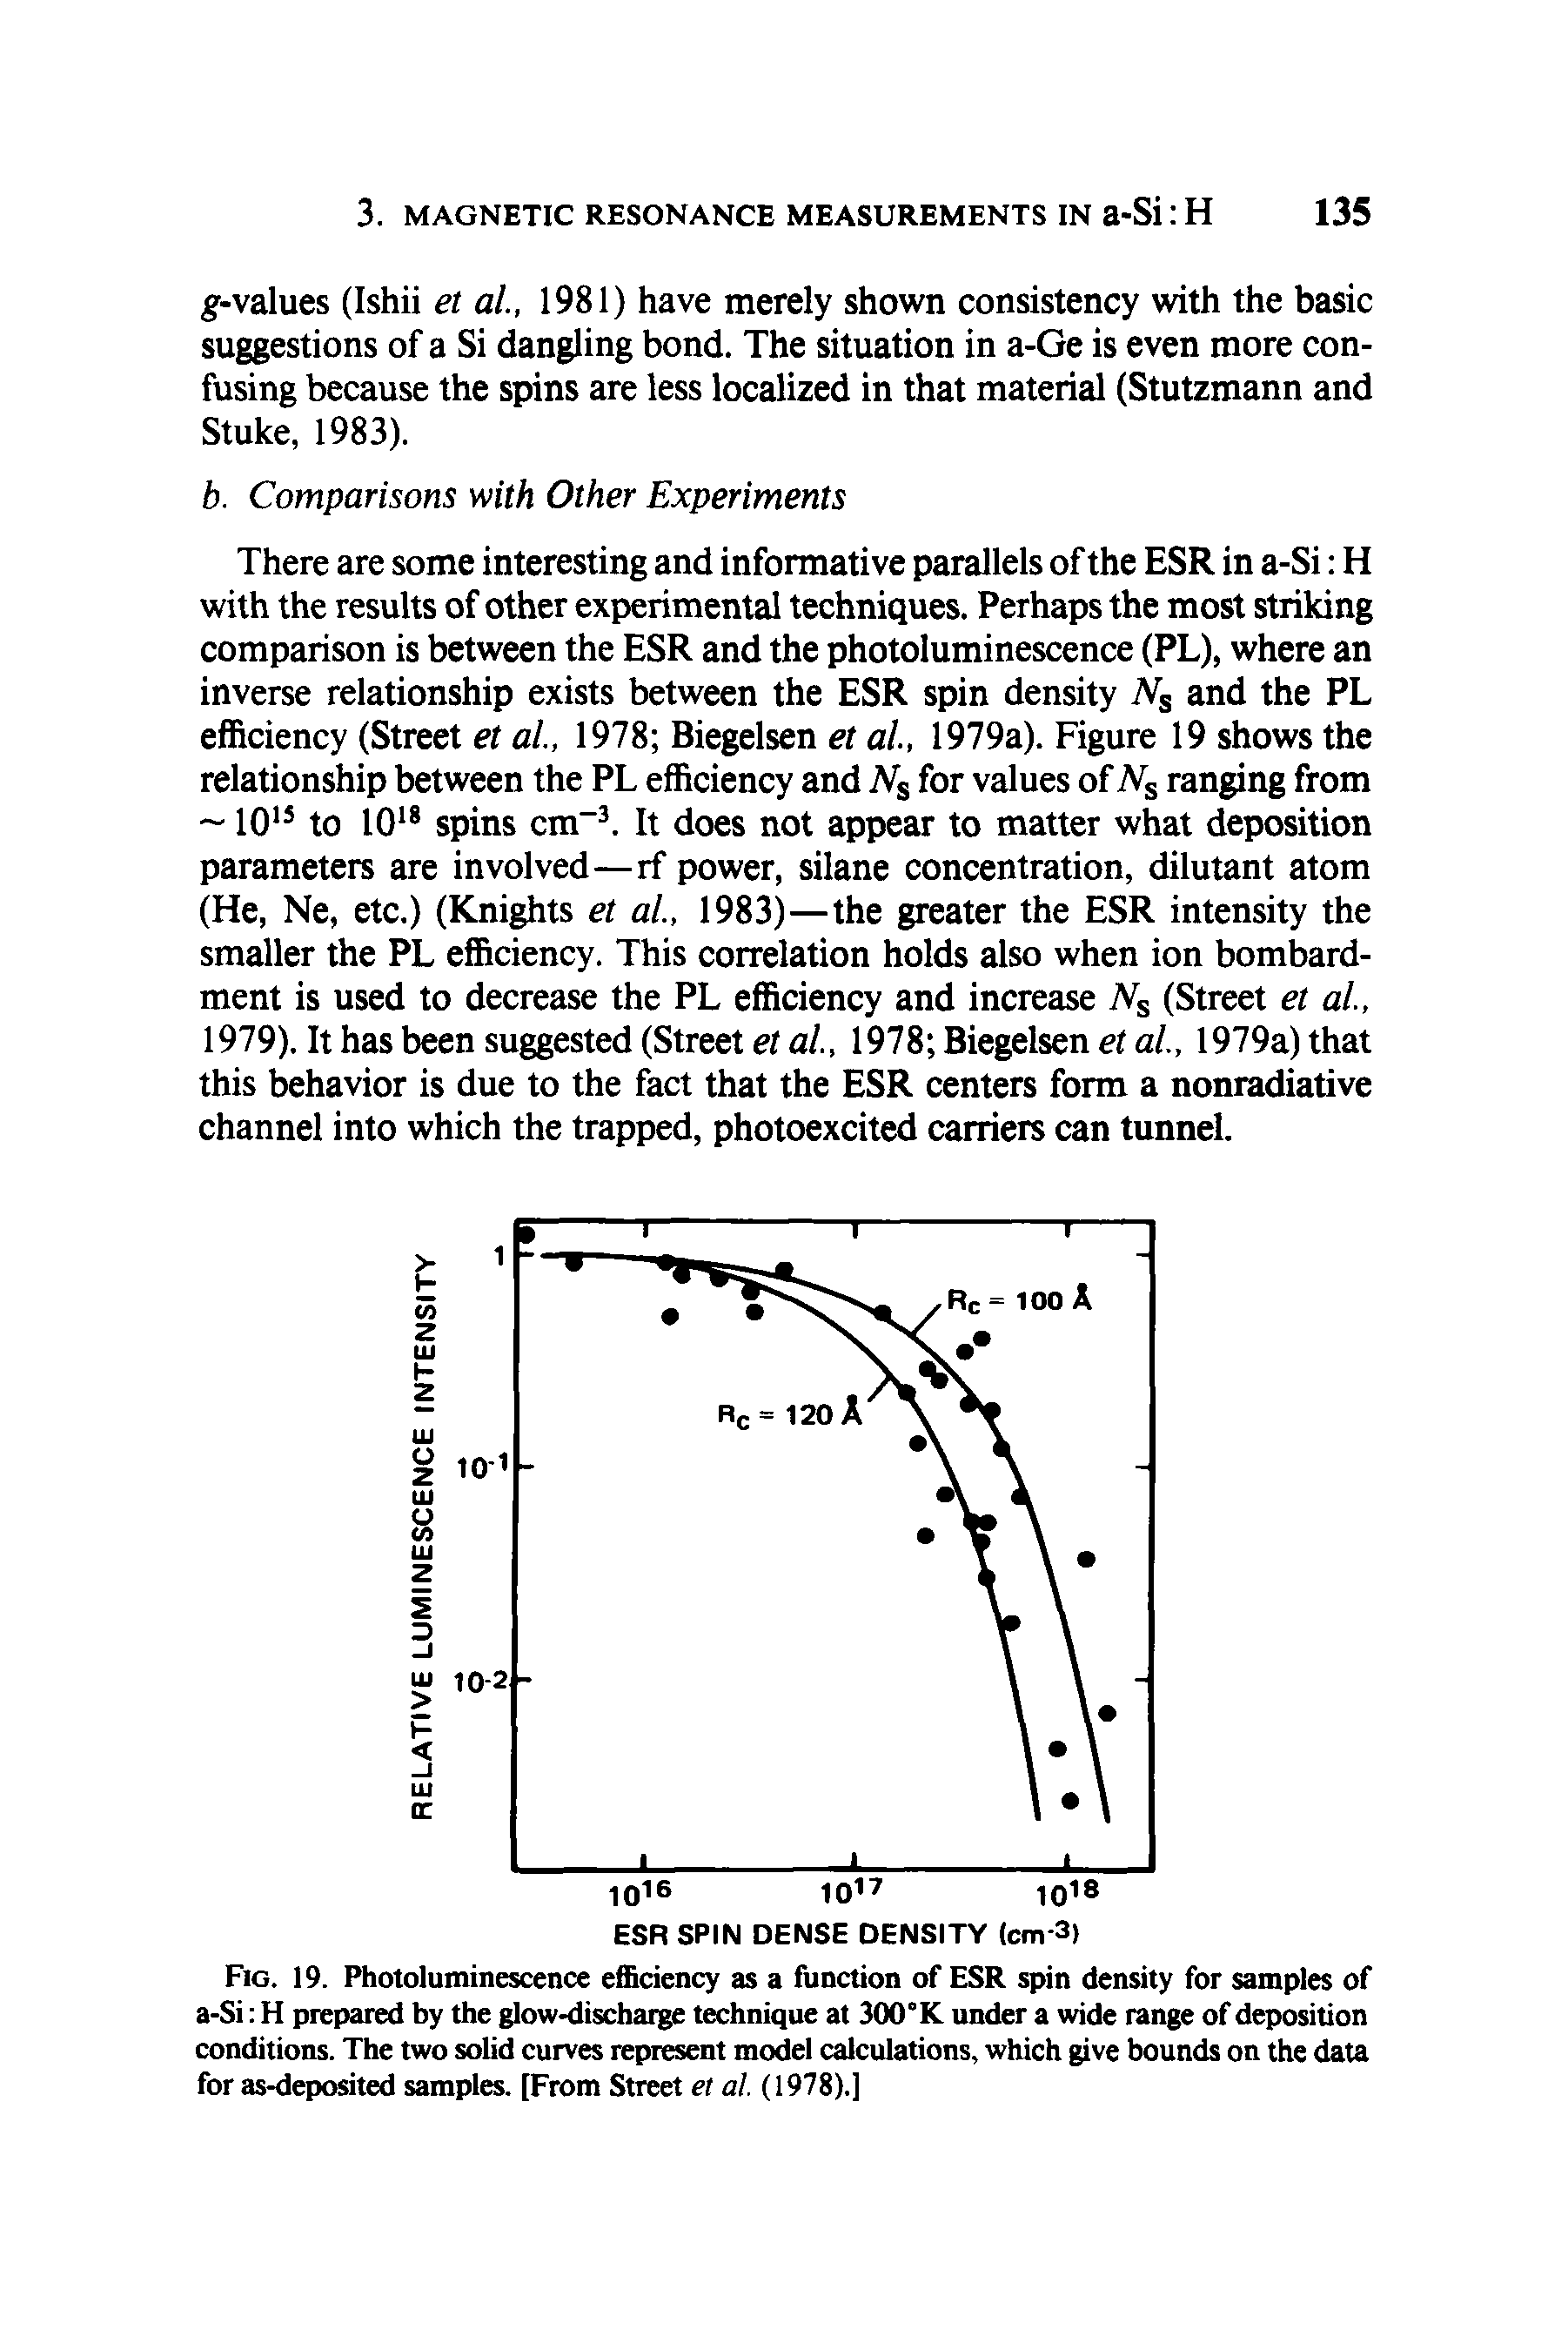 Fig. 19. Photoluminescence efficiency as a function of ESR spin (tensity for samples of a-Si H prepiared by the glow-discharge technique at 300°K under a wide range of deposition conditions. The two solid curves represent model calculations, which give bounds on the data for as-deposited samples. [From Street et al (1978).]...